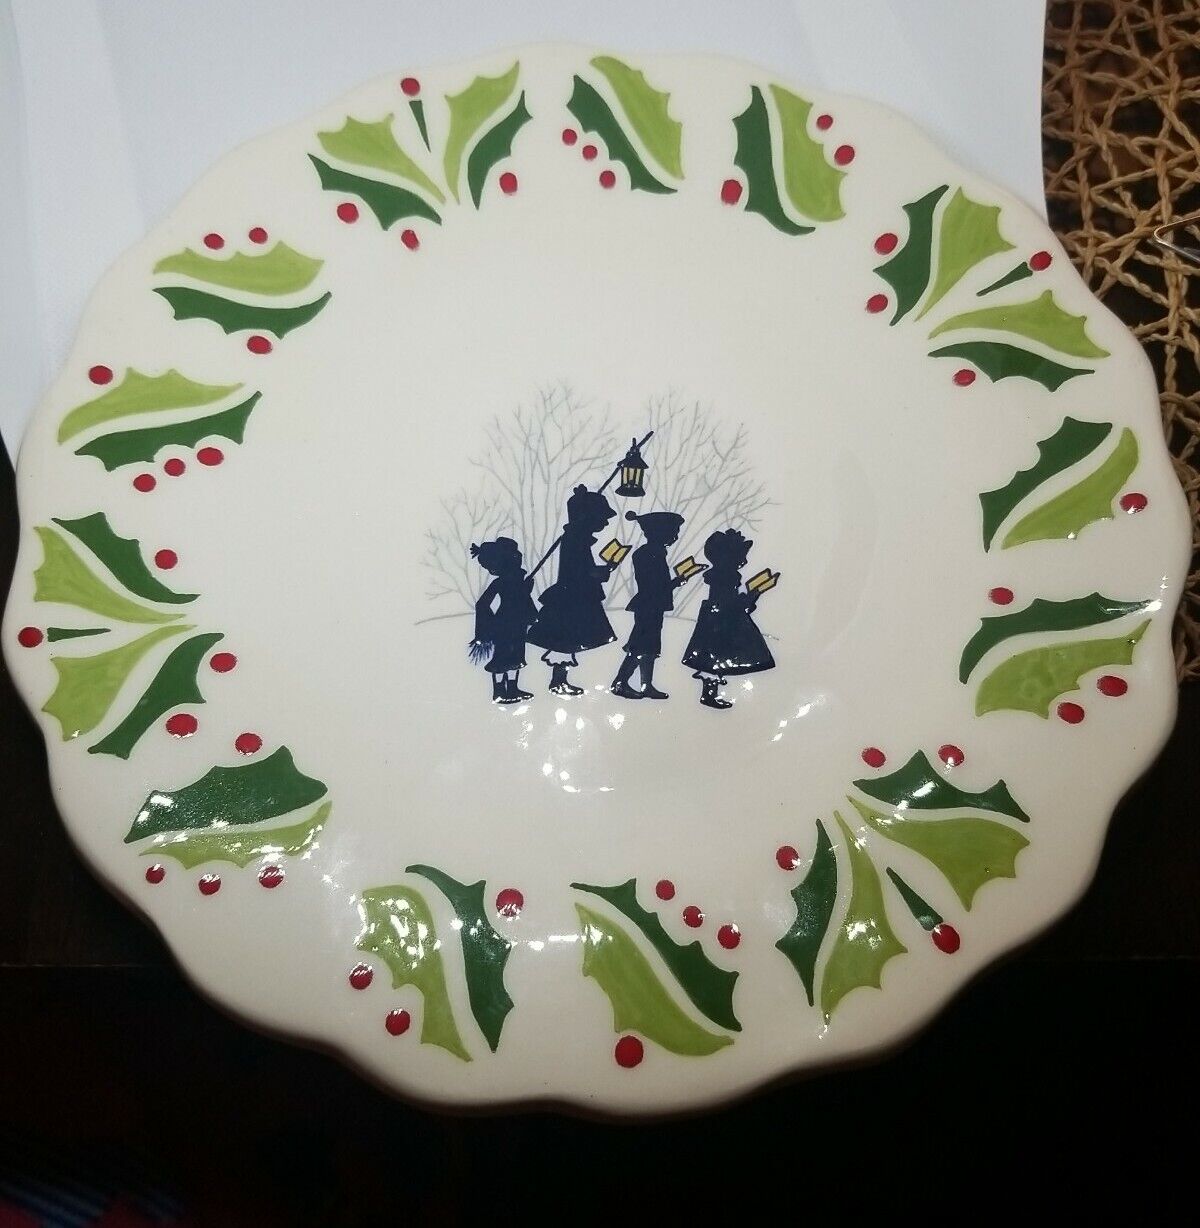 Vintage 1988 Handcrafted by Design Tiles Christmas Carolers Decorative Plate